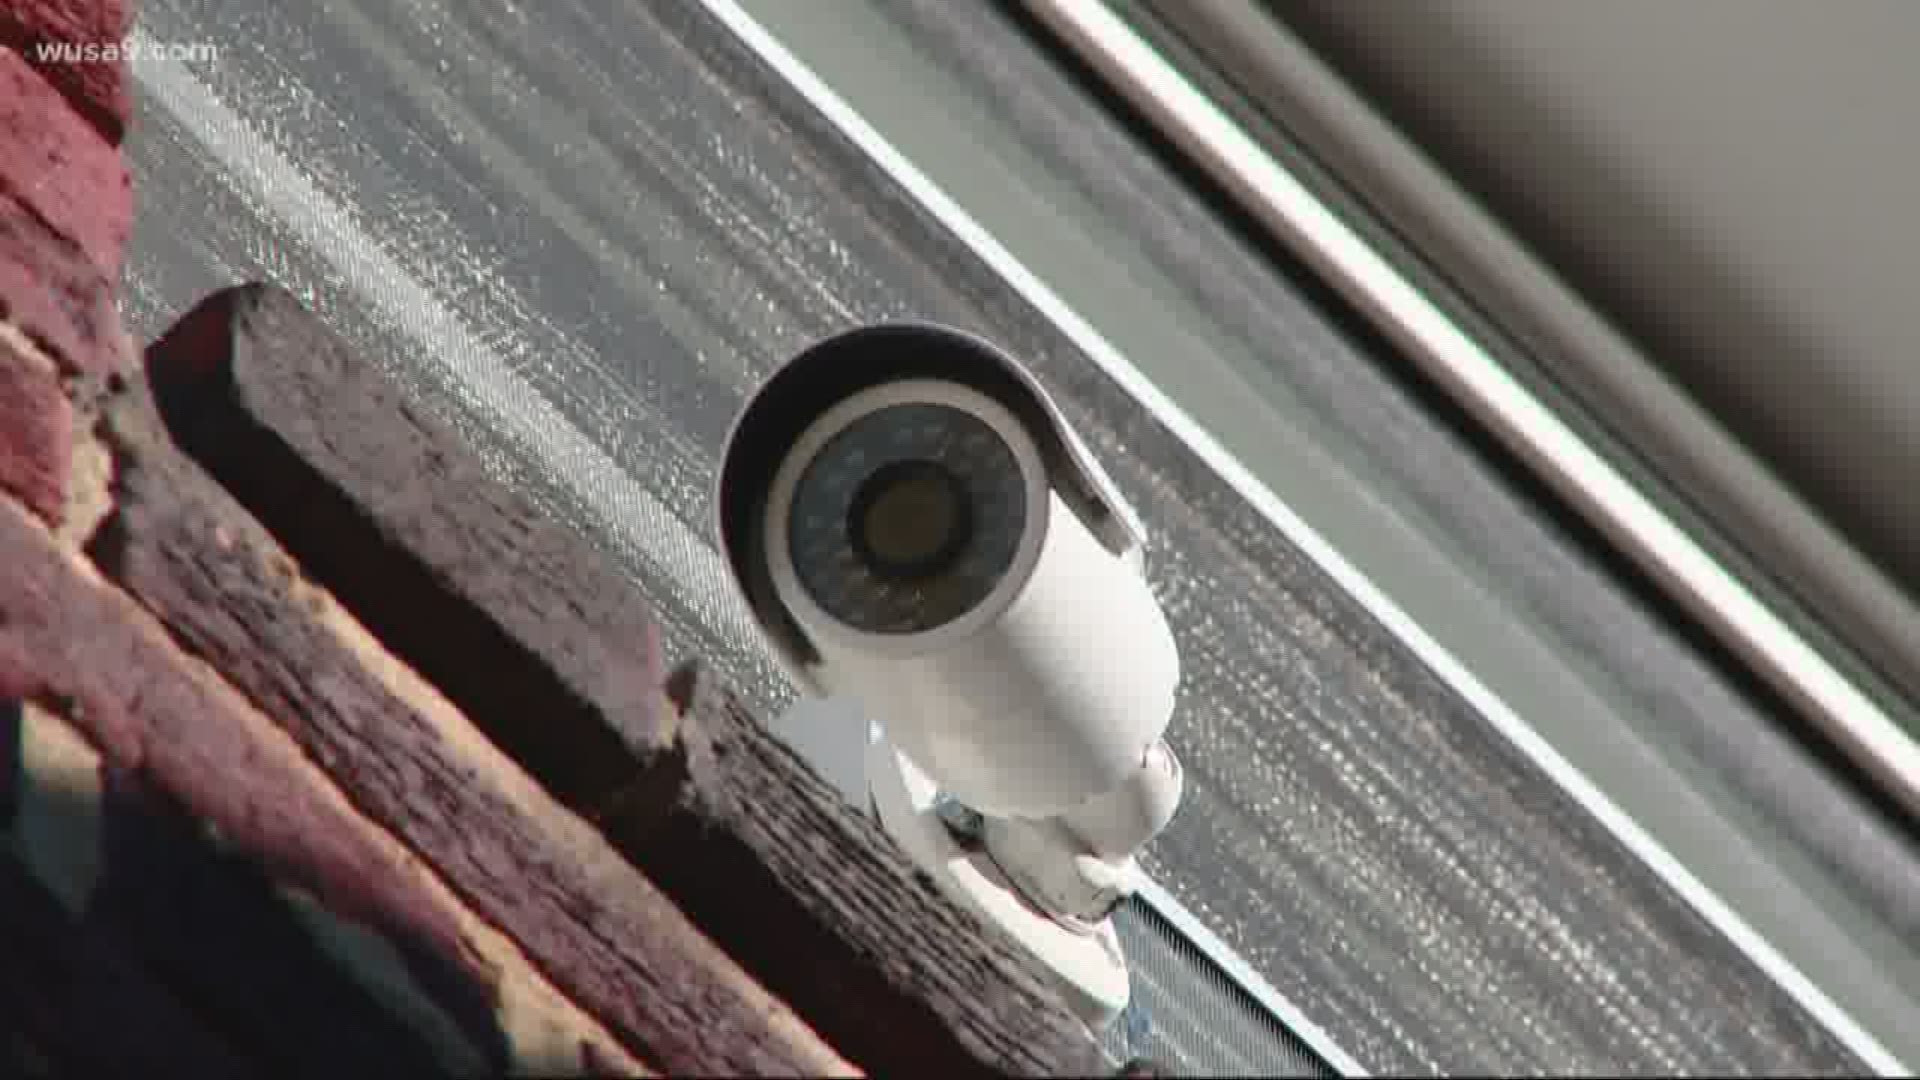 DC has been paying for people to install home security cameras.